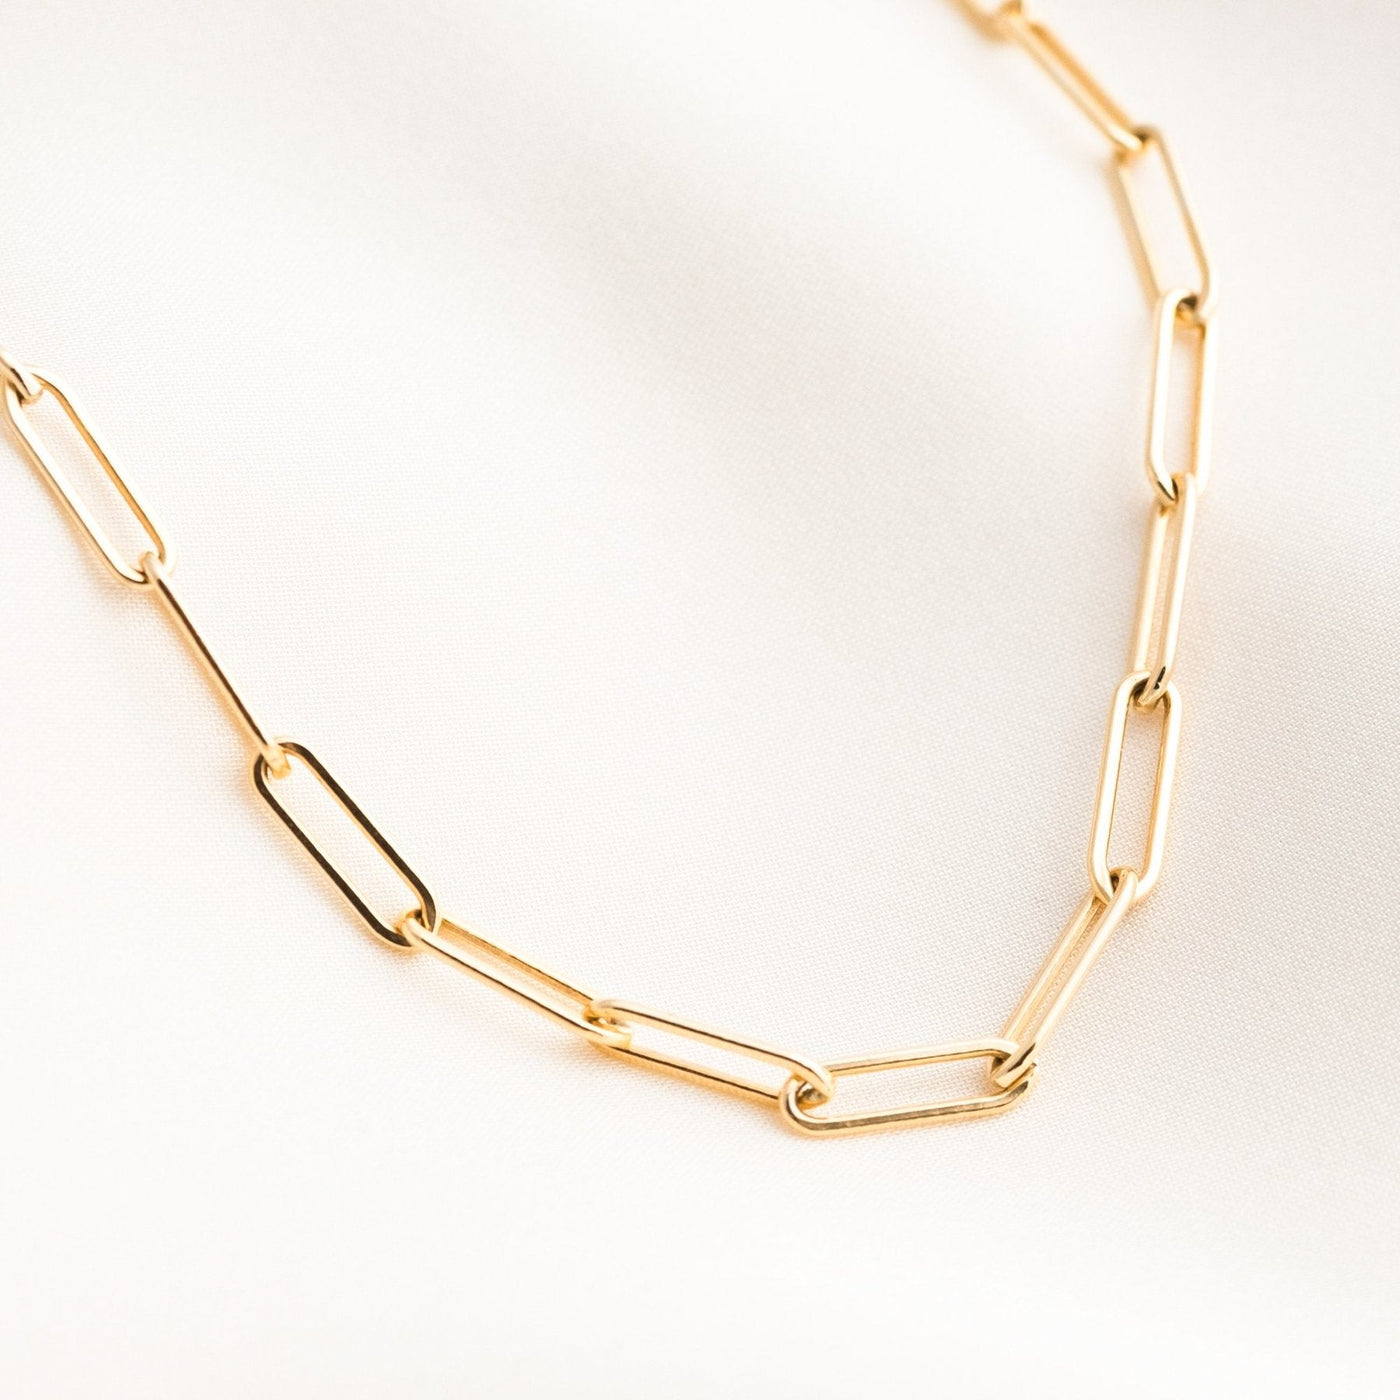 Chunky Paperclip Necklace by Simple & Dainty Jewelry